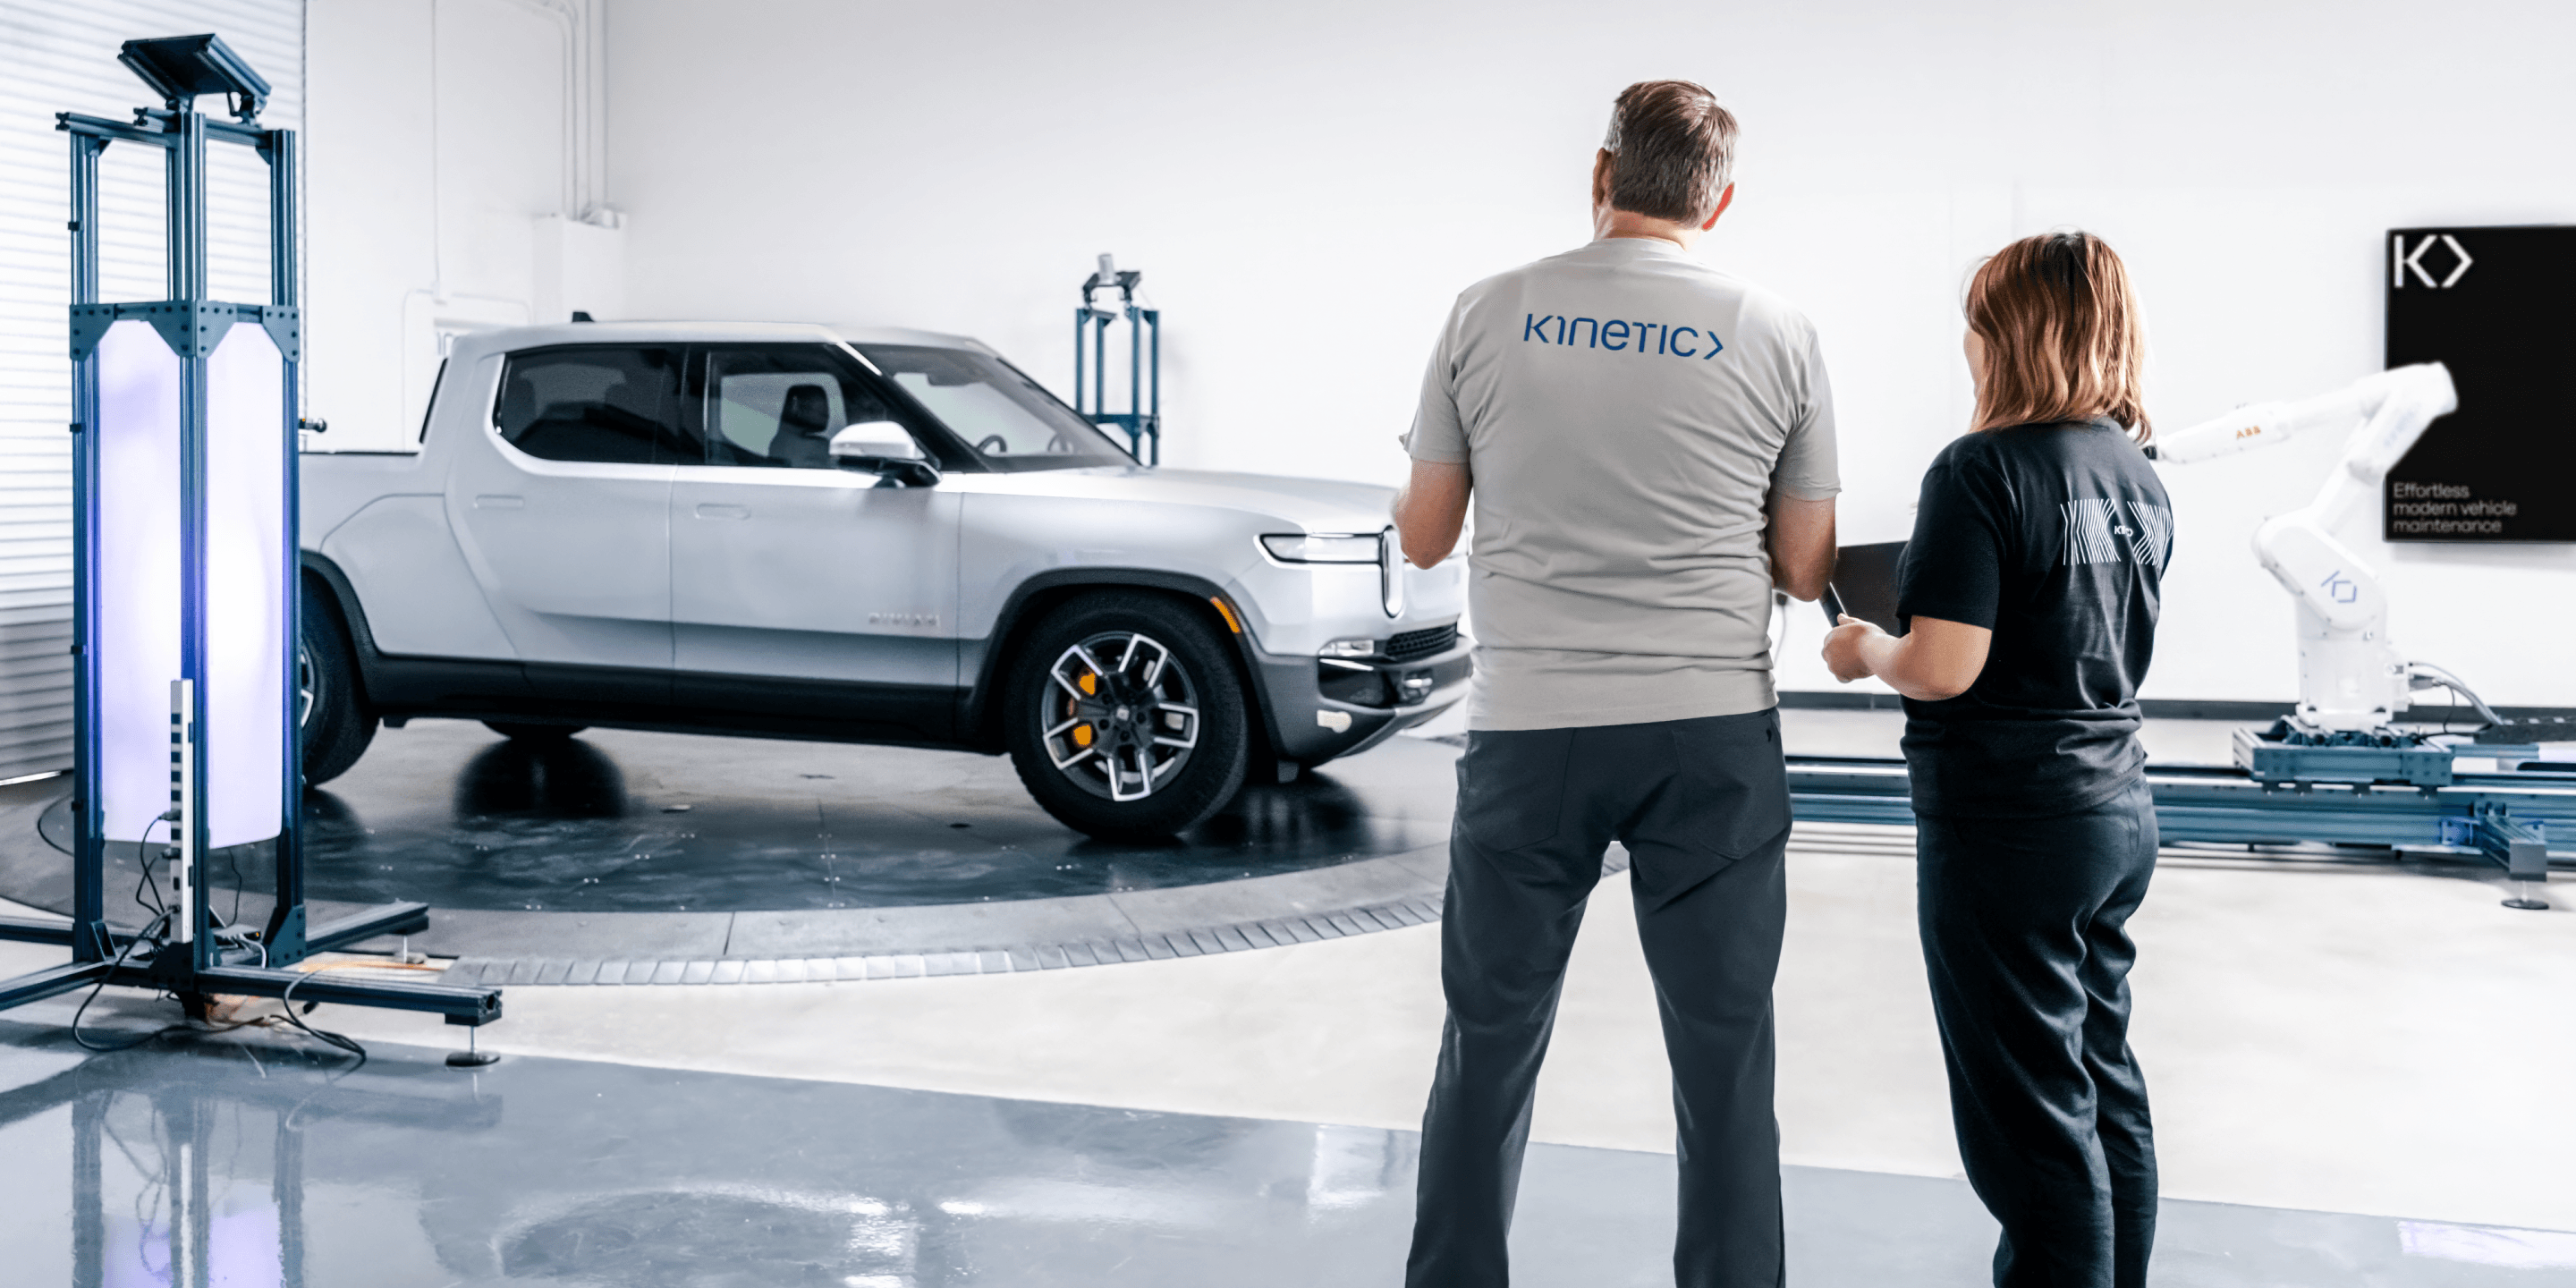 Two Kinetic technicians stand side by side in a Kinetic Hub, assessing an electric silver Rivian pickup truck that sits on a turntable, waiting to be calibrated.